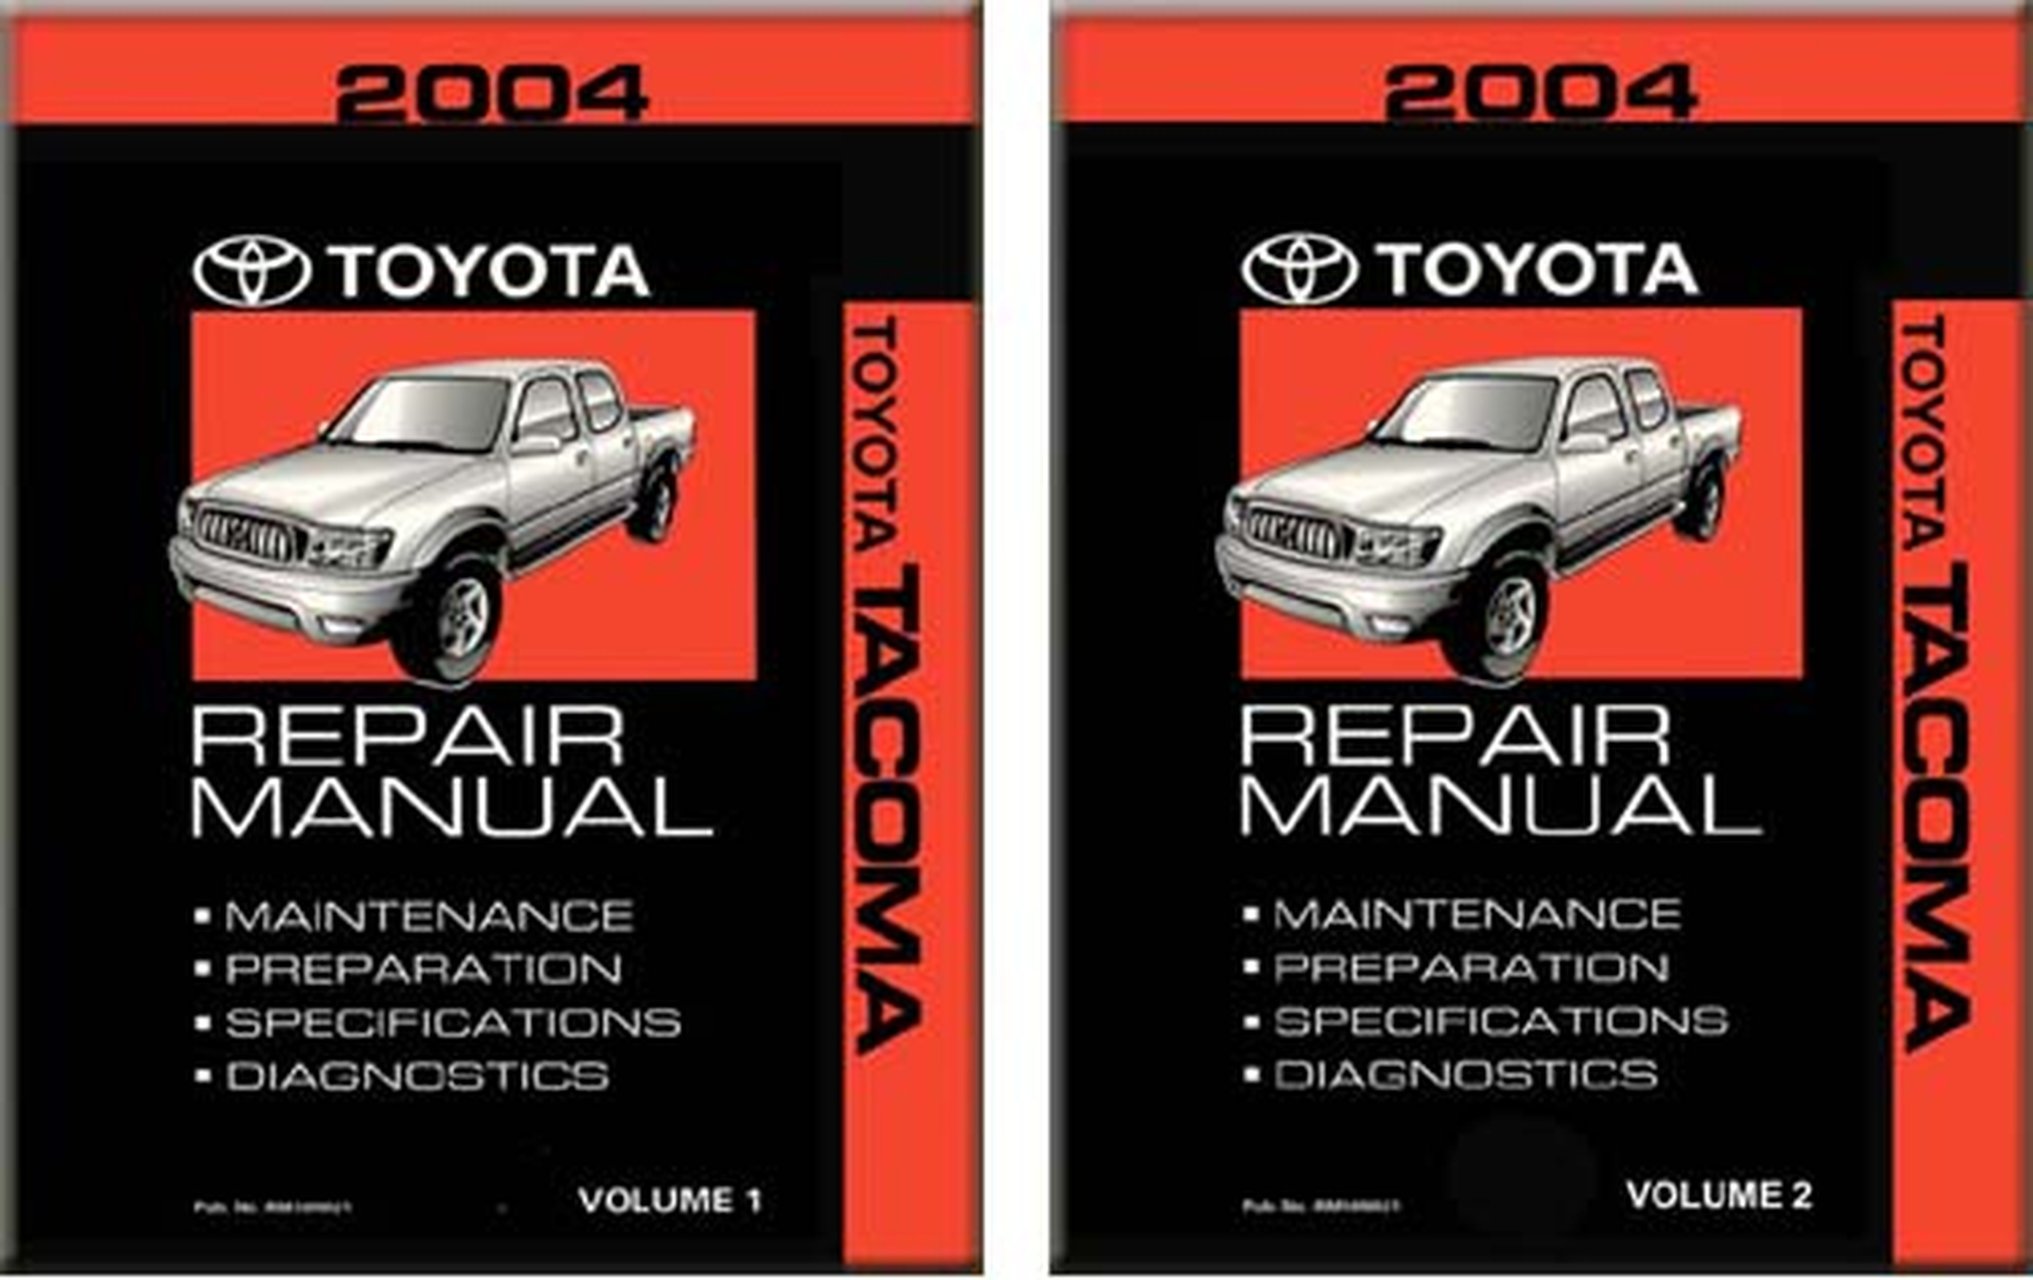 Service manuals books for Chevrolet cars 2000